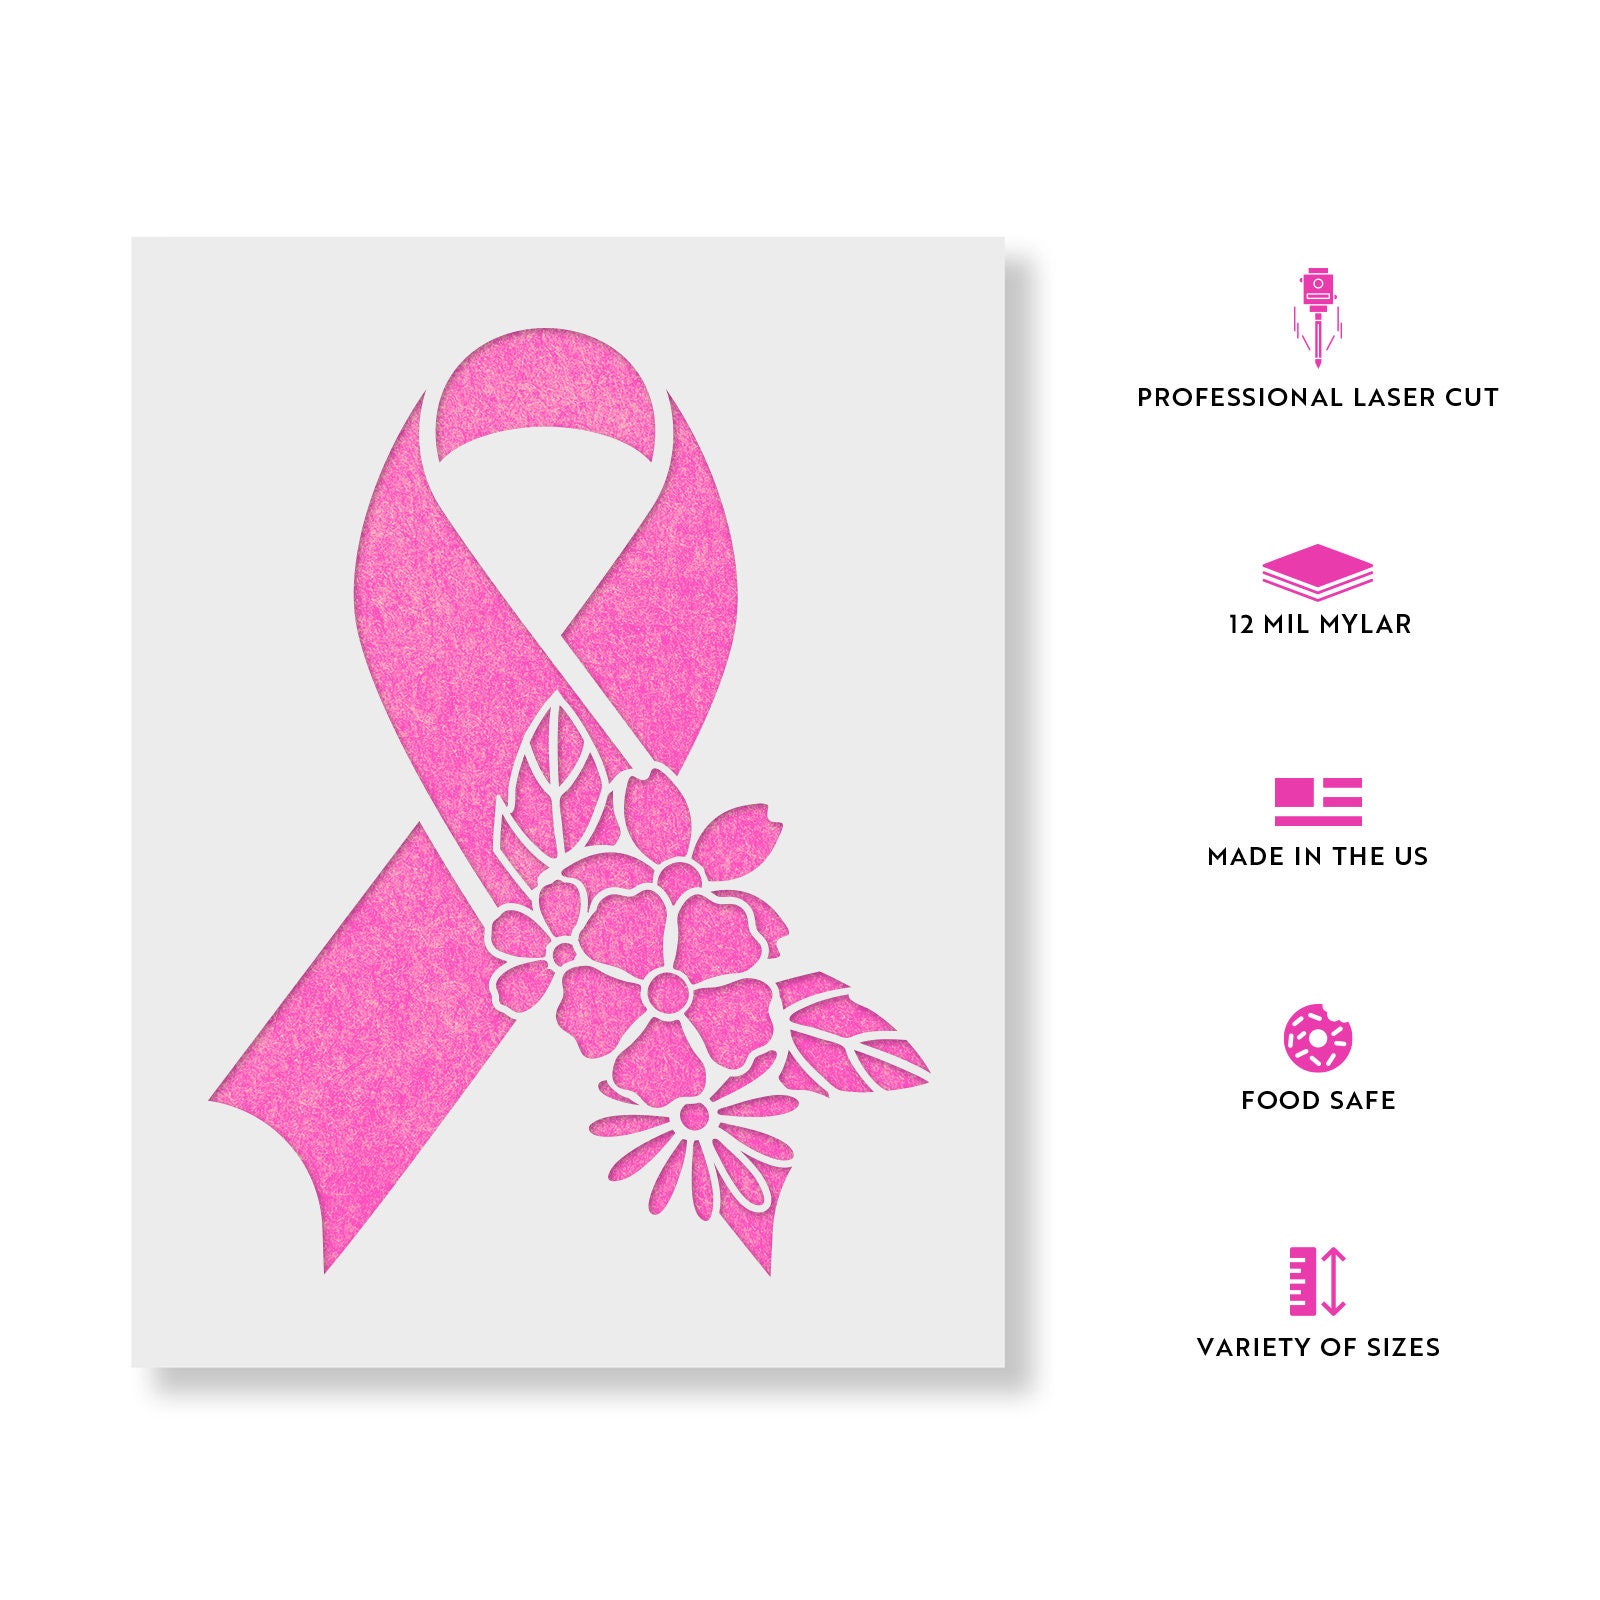 Floral Breast Cancer Ribbon Stencil Reusable Stencils for Painting Create  DIY Floral Breast Cancer Ribbon Home Decor 